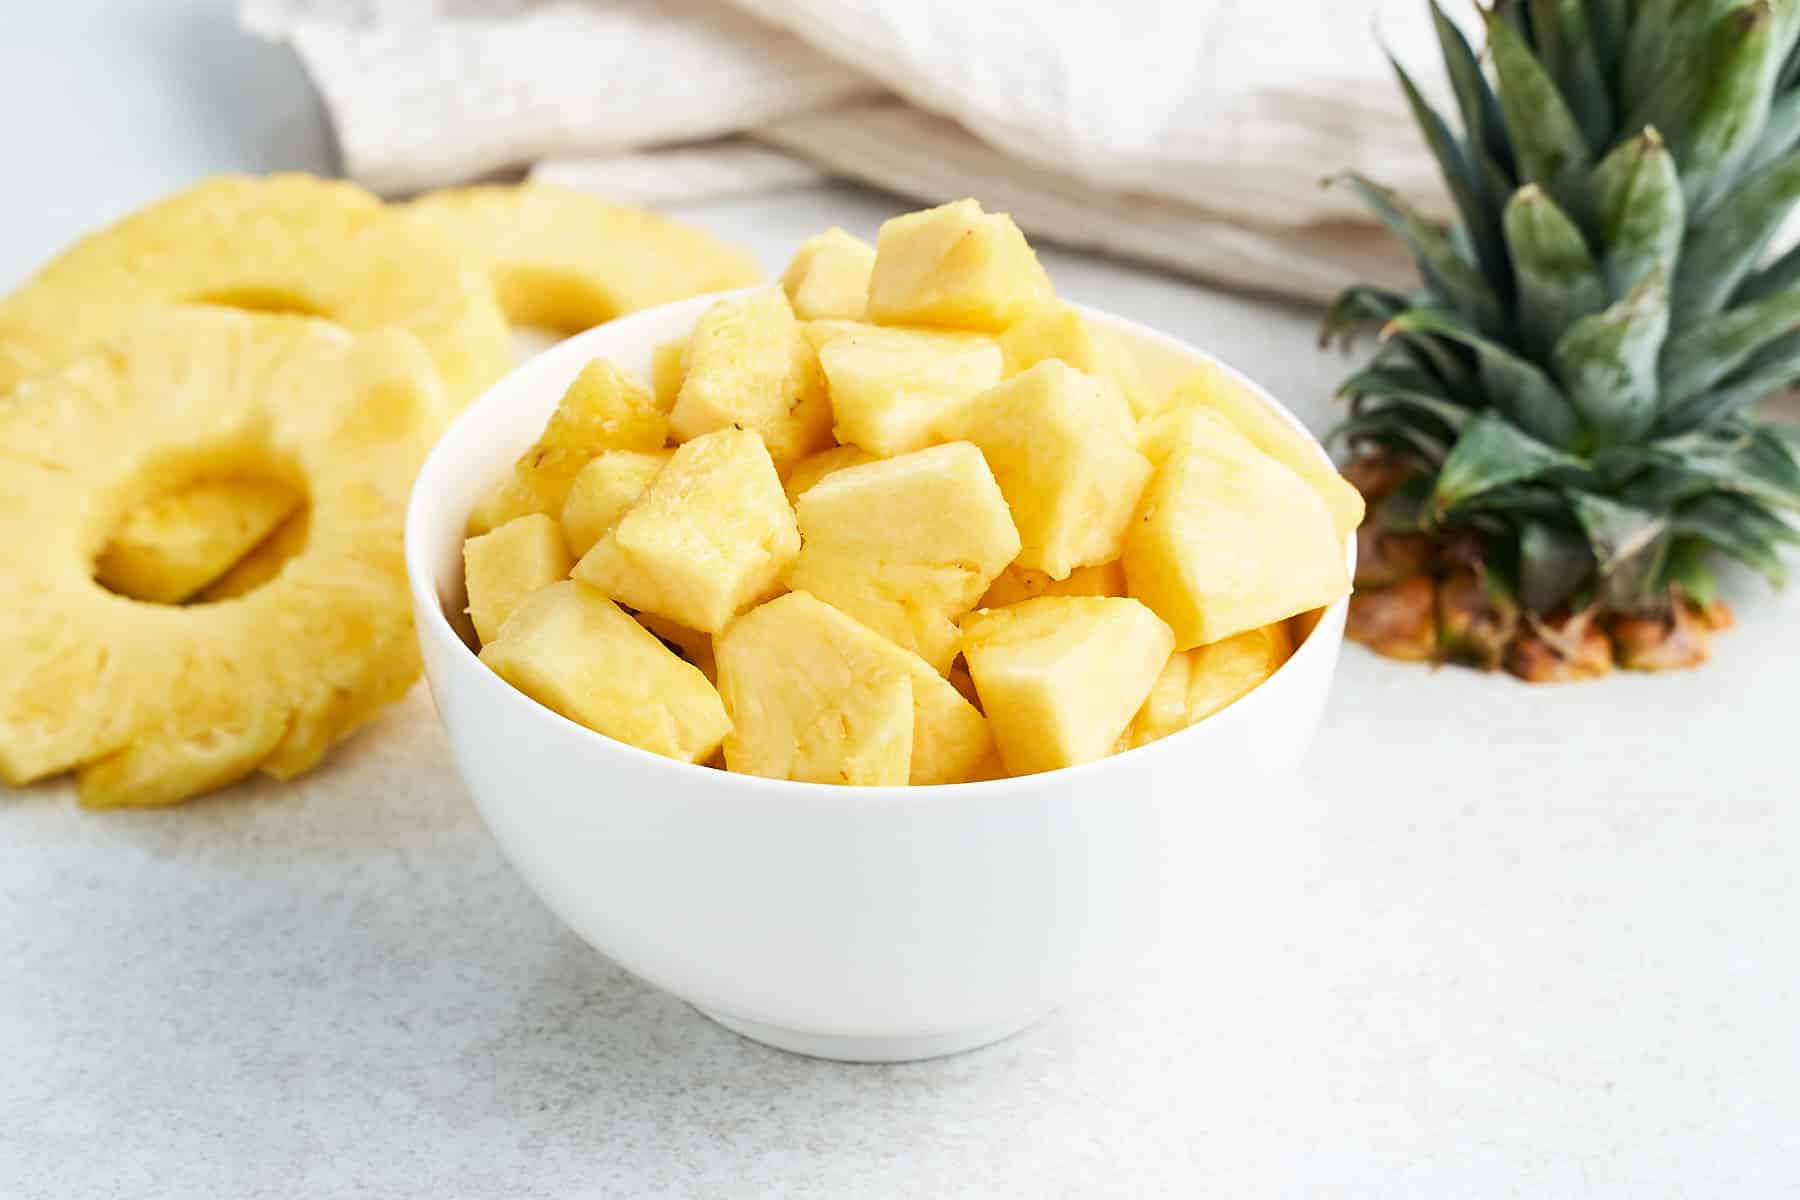 How To Store Cut Pineapple